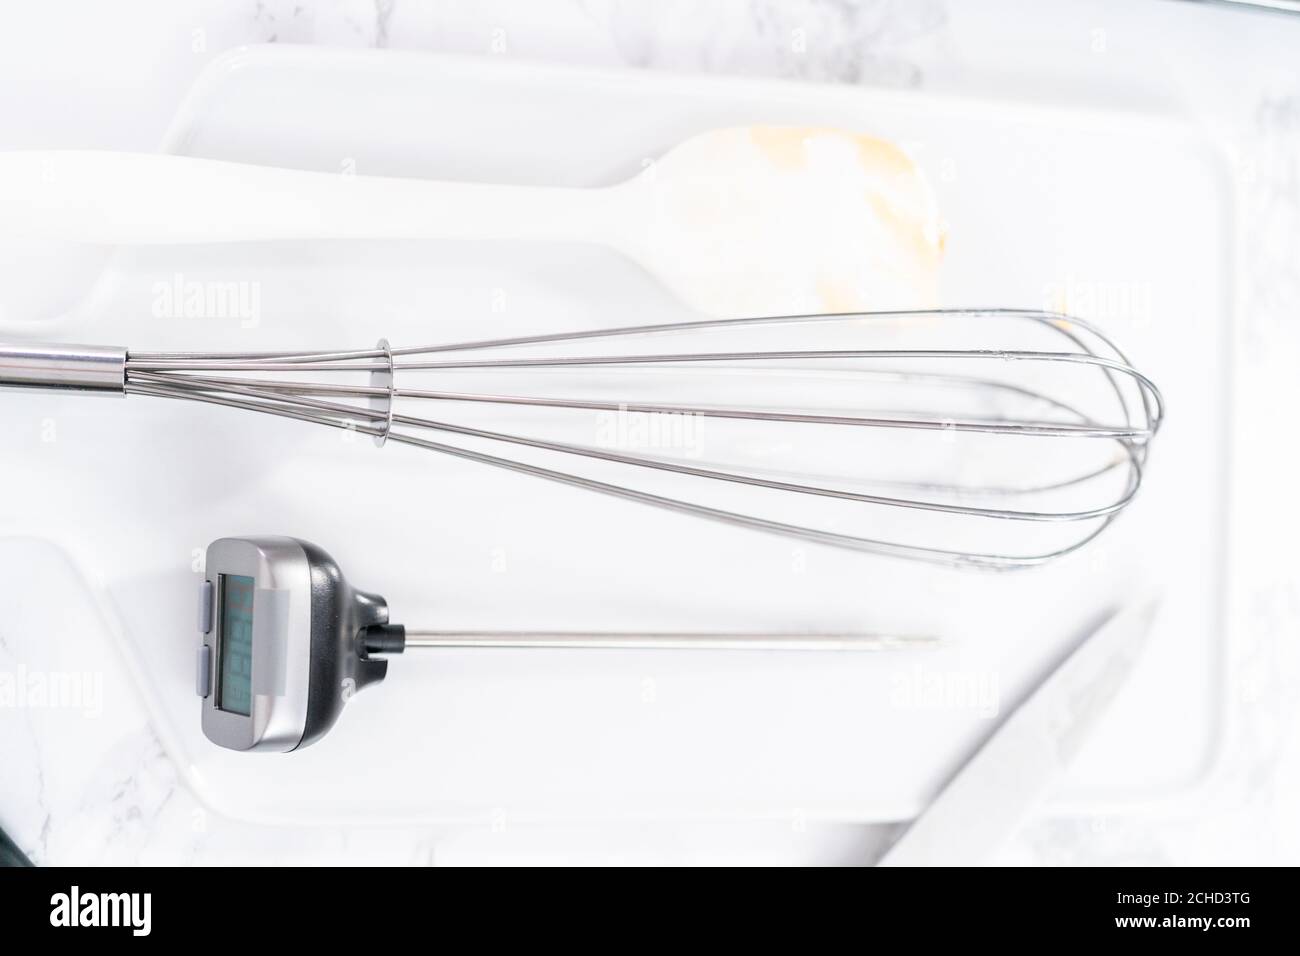 https://c8.alamy.com/comp/2CHD3TG/kitchen-whisk-and-candy-thermometer-on-a-white-cutting-board-2CHD3TG.jpg